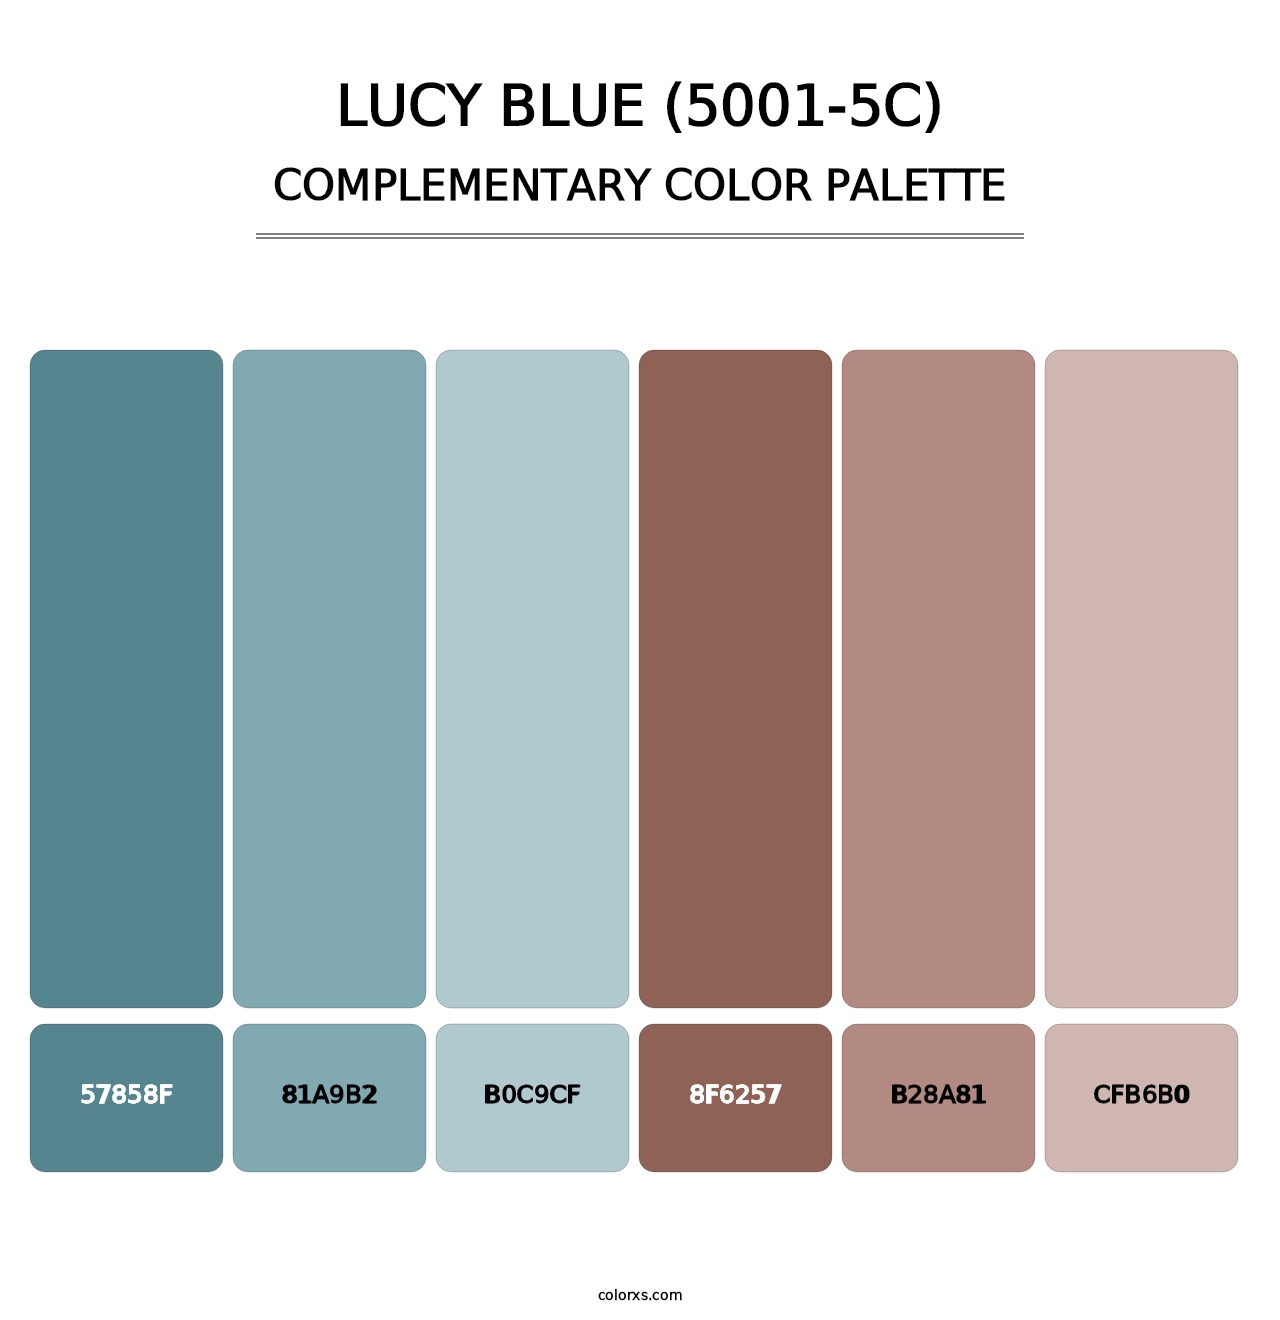 Lucy Blue (5001-5C) - Complementary Color Palette